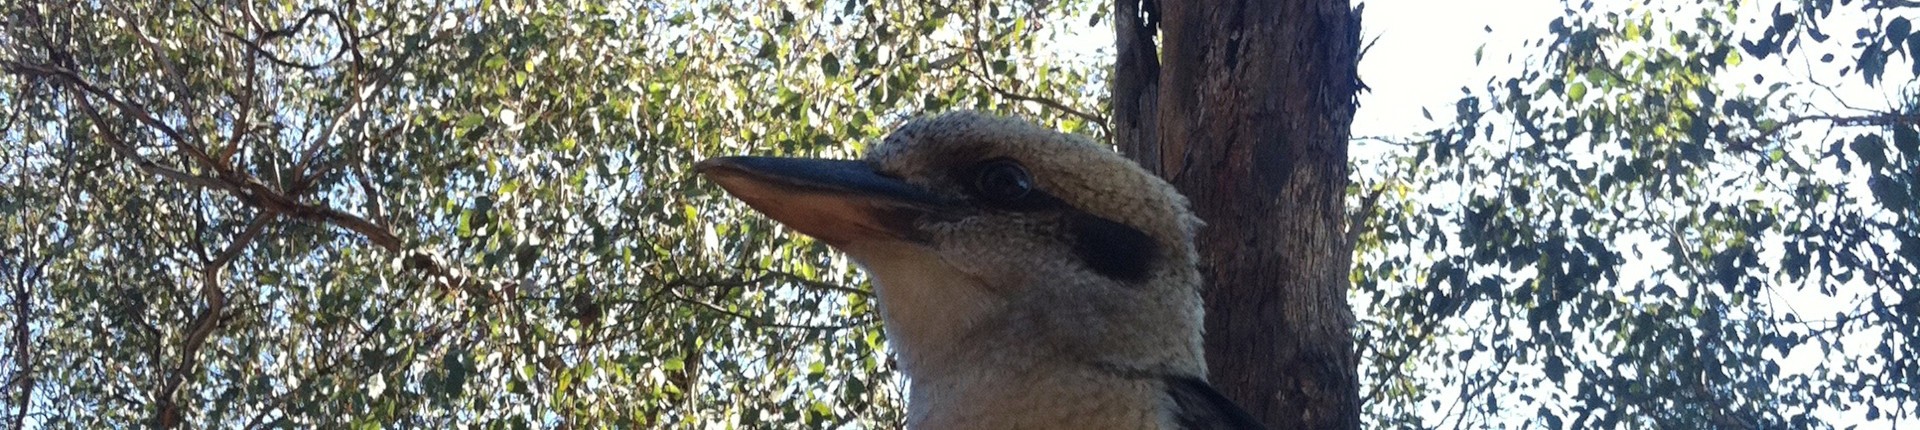 Laughing Kookaburra perched in front of trees.